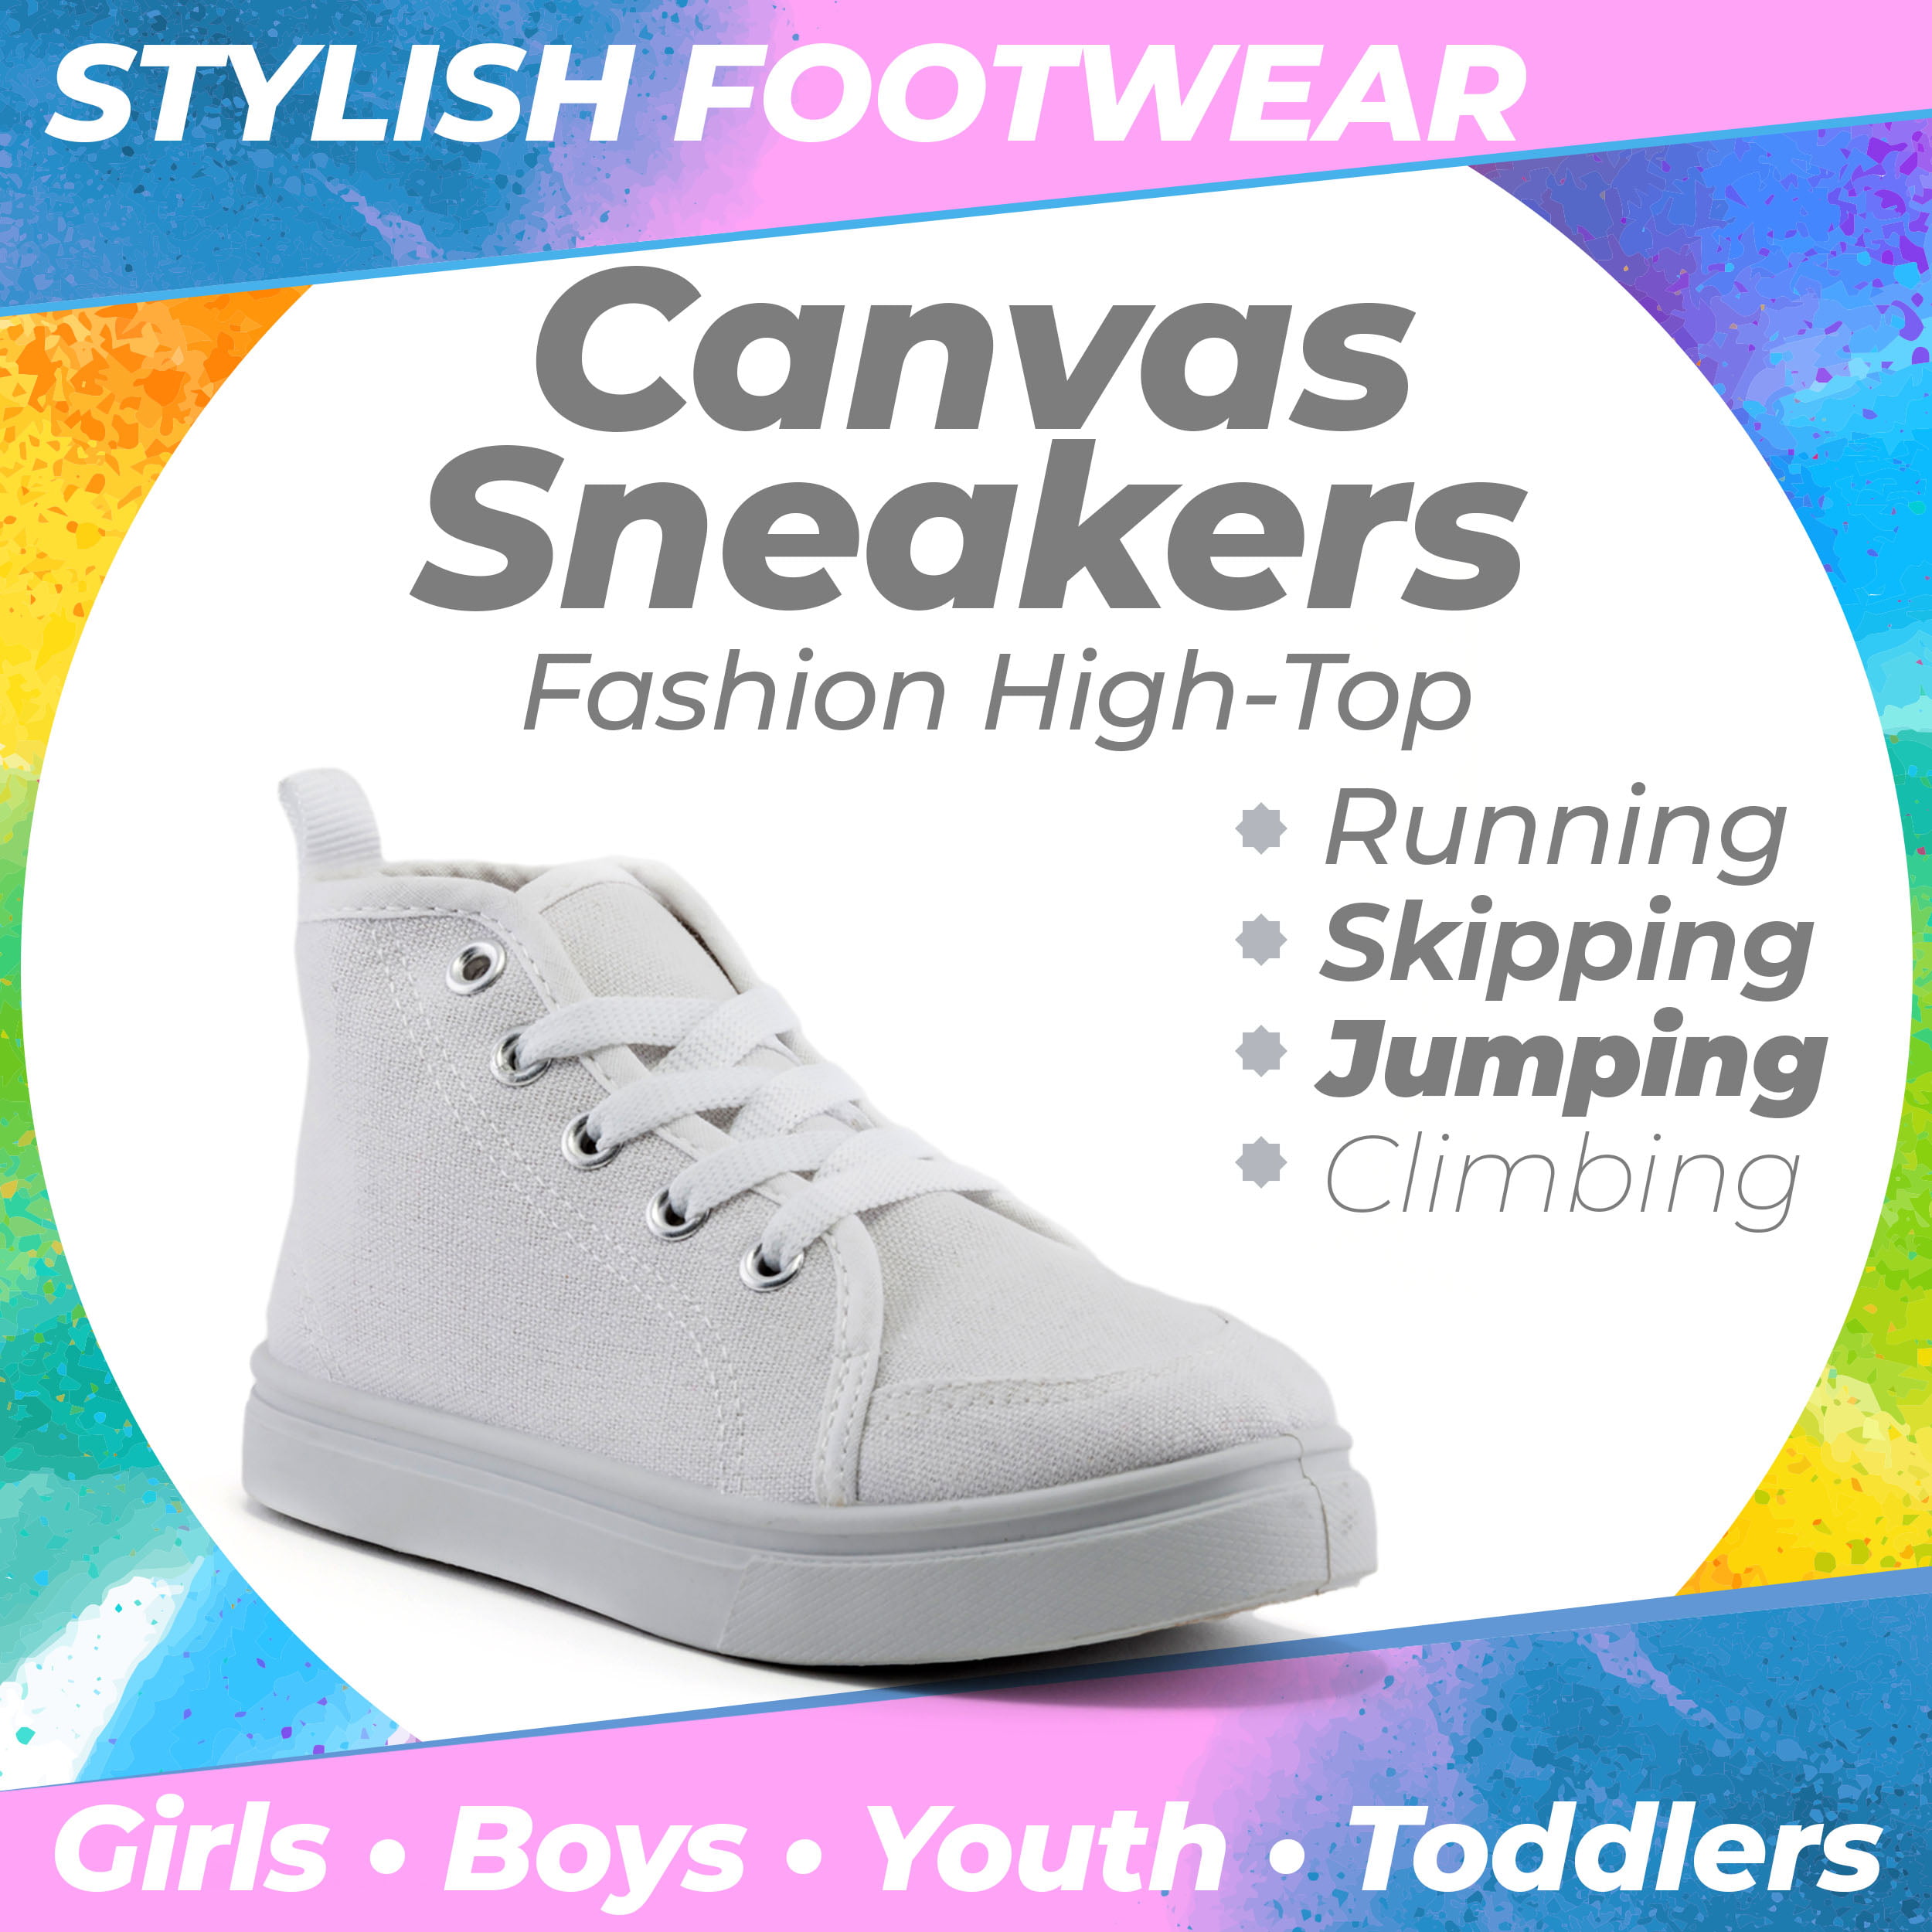 Toddlers & Kids ZOOGS Fashion High-Top Canvas Sneakers Girls Boys Youth